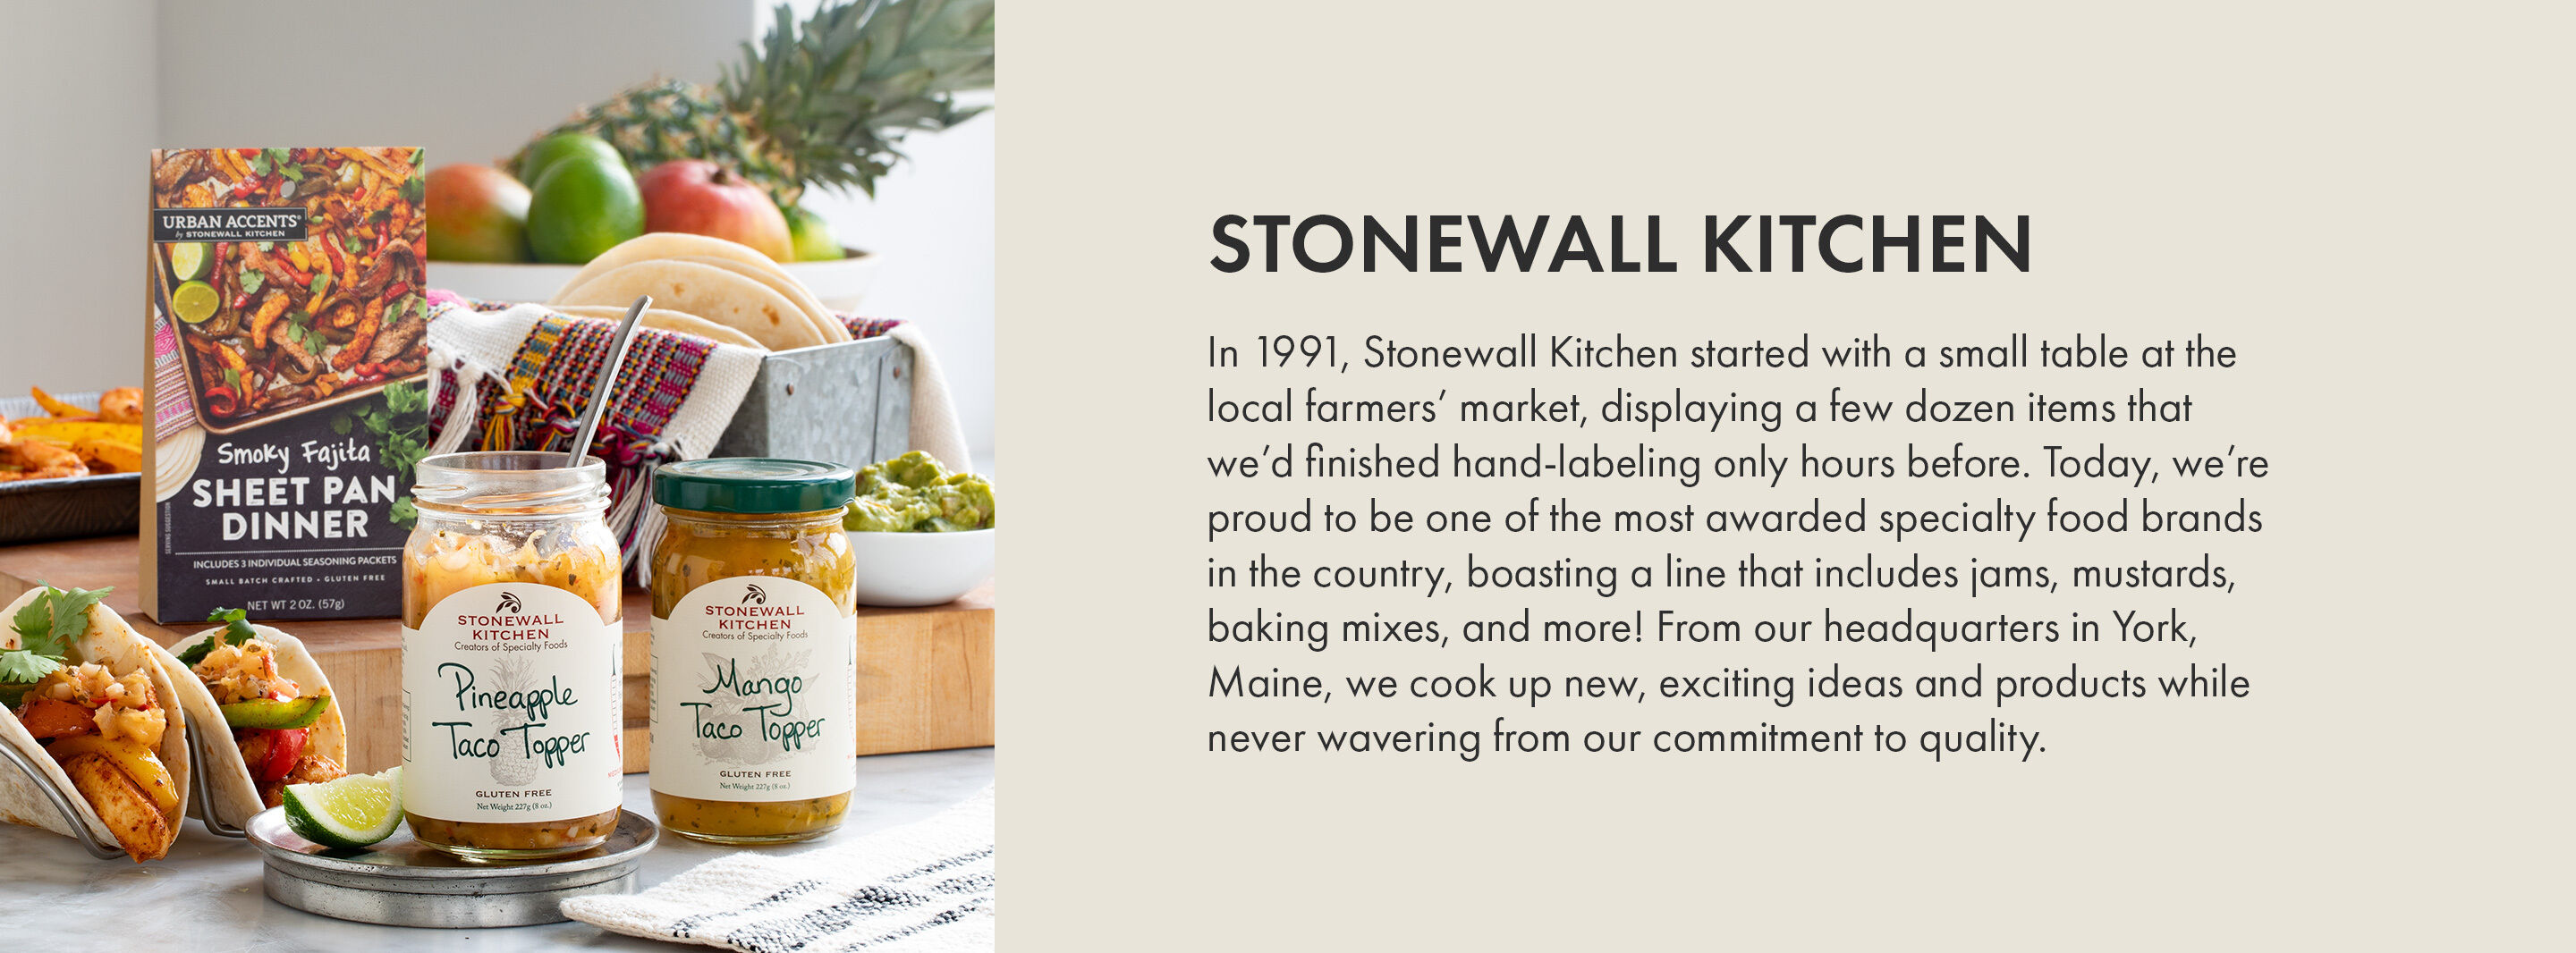 Stonewall Kitchen | In 1991, Stonewall Kitchen started with a small table at the local farmers' market, displaying a few dozen items that we'd finished hand-labeling only hours before. Today, we're proud to be one of the most awarded specialty food brands in the country, boasting a line that includes jams, mustards, baking mixes and more! From our headquarters in York, Maine, we cook up new, exciting ideas and products while never wavering from our commitment to quality.